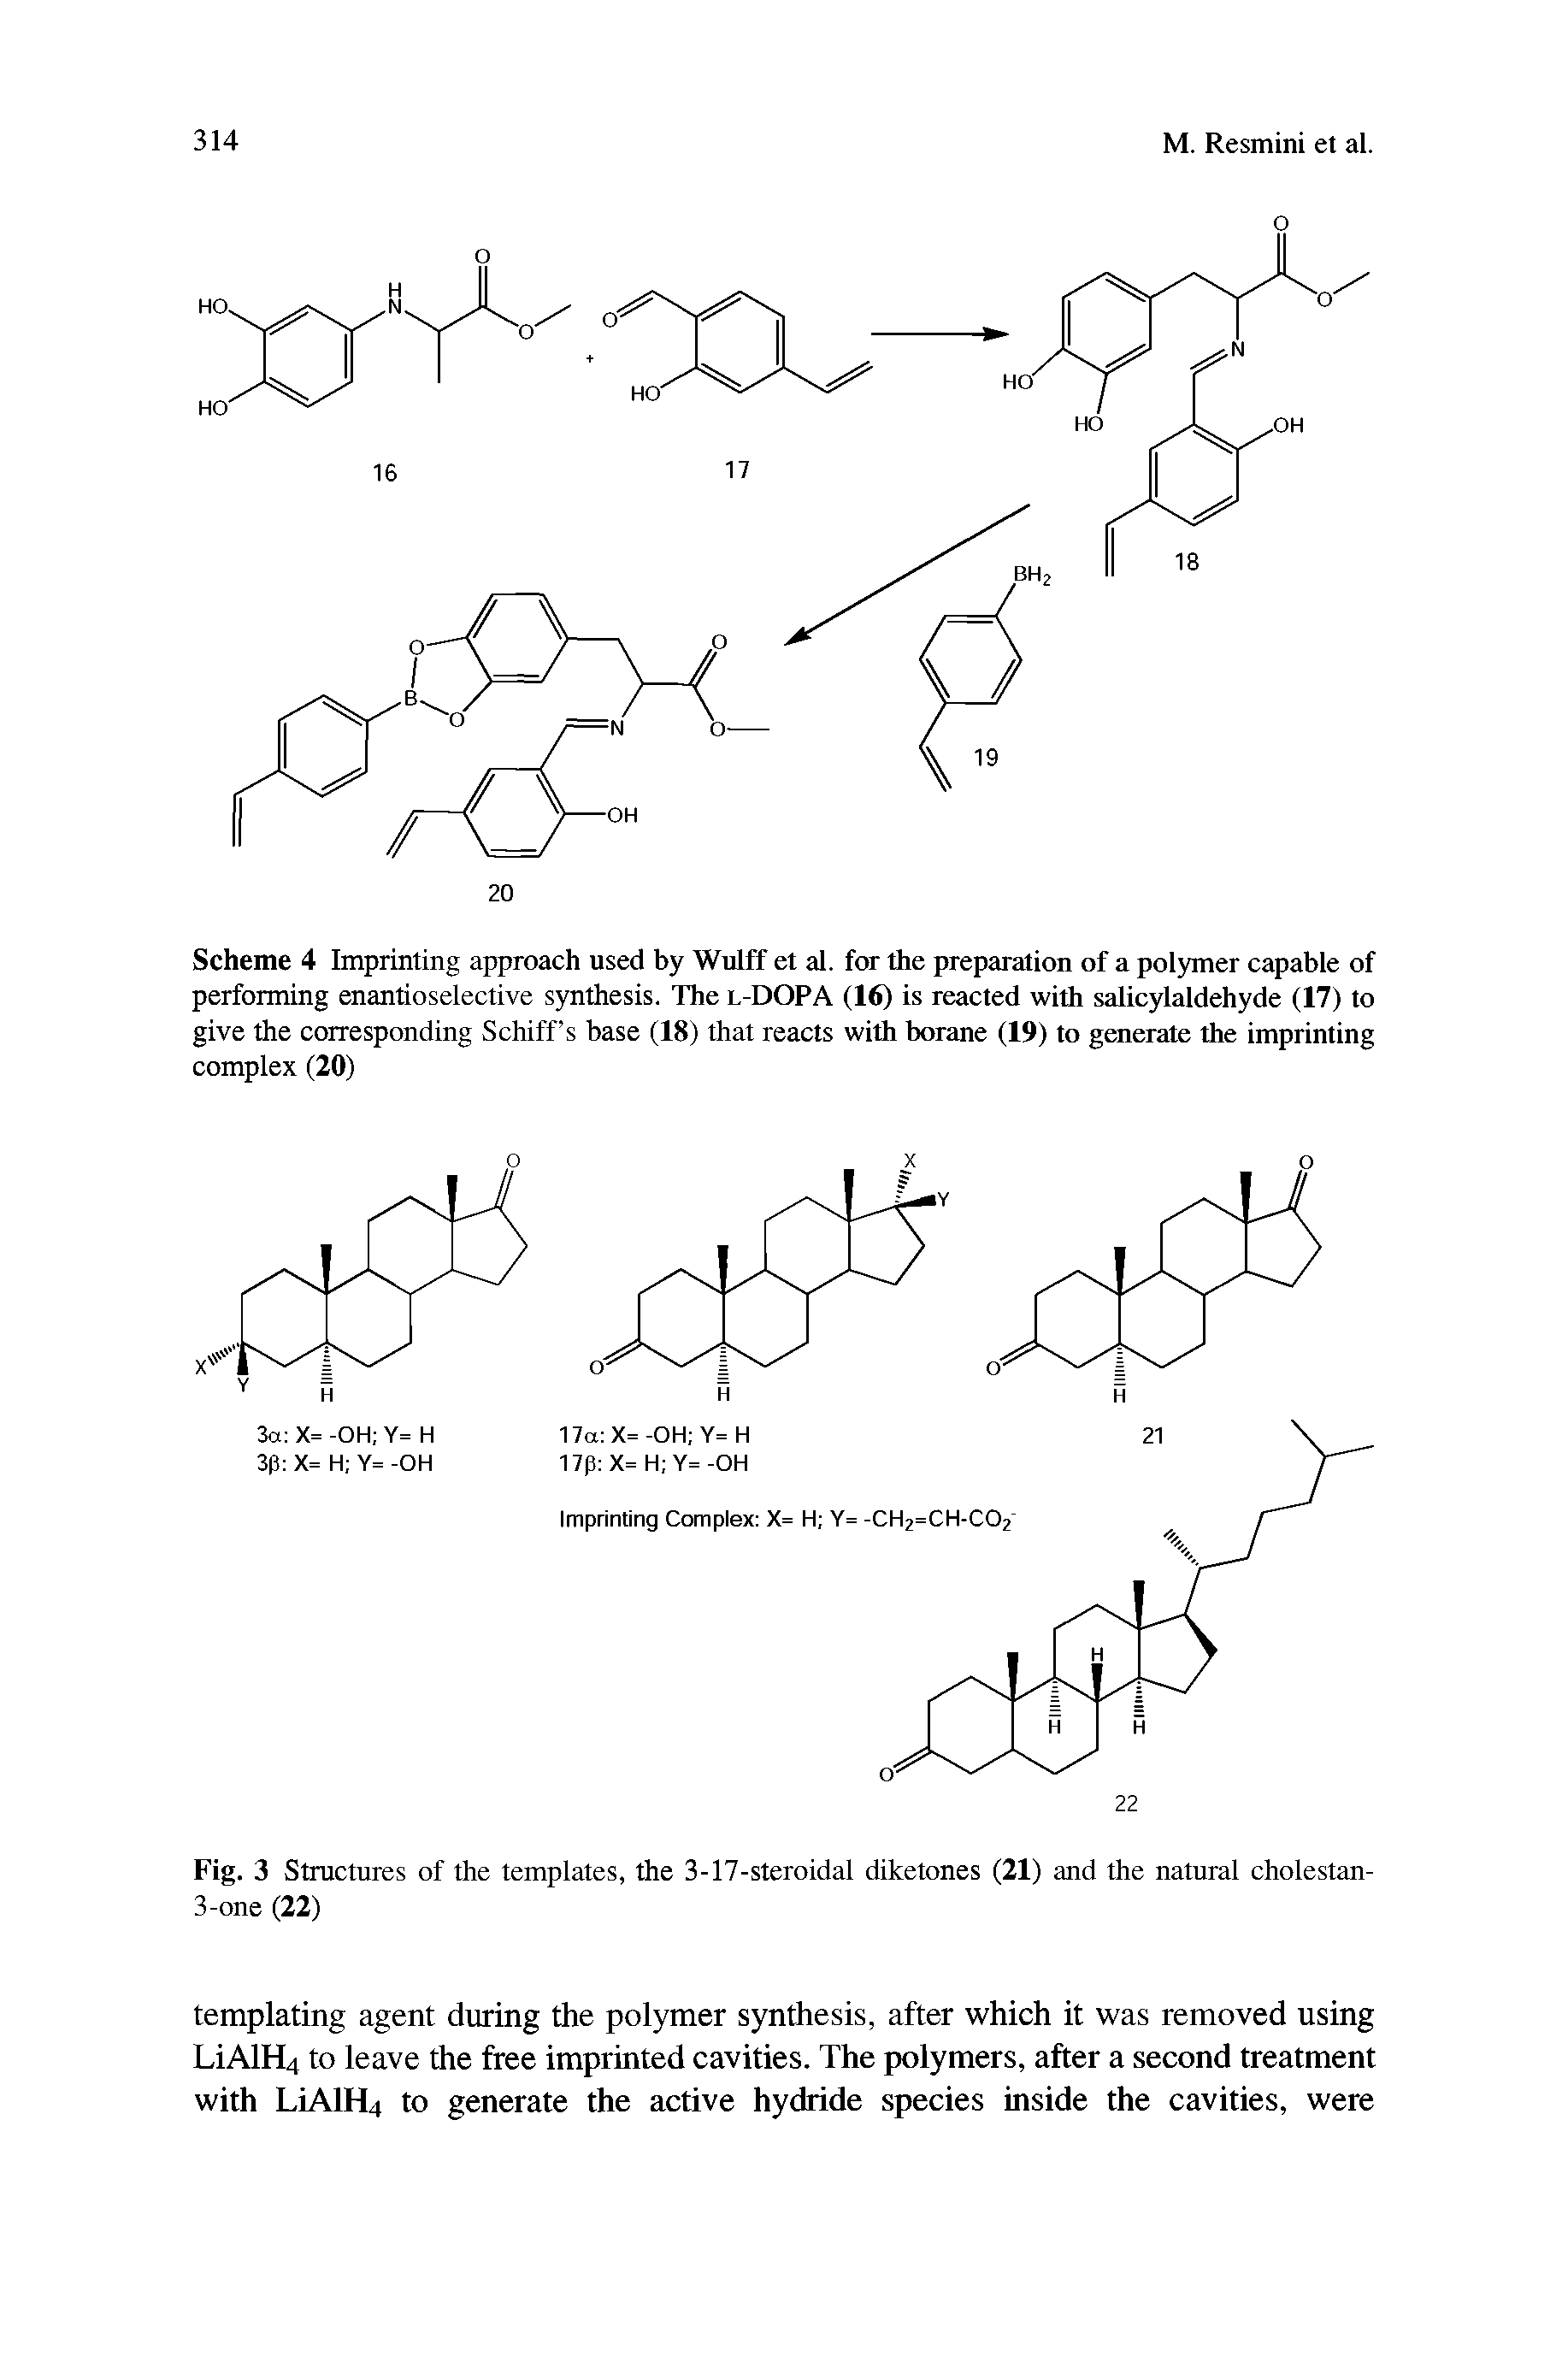 Scheme 4 Imprinting approach used by Wulff et al. for the preparation of a polymer capable of performing enantioselective synthesis. The l-DOPA (16) is reacted with salicylaldehyde (17) to give the corresponding Schiff s base (18) that reacts with borane (19) to generate the imprinting complex (20)...